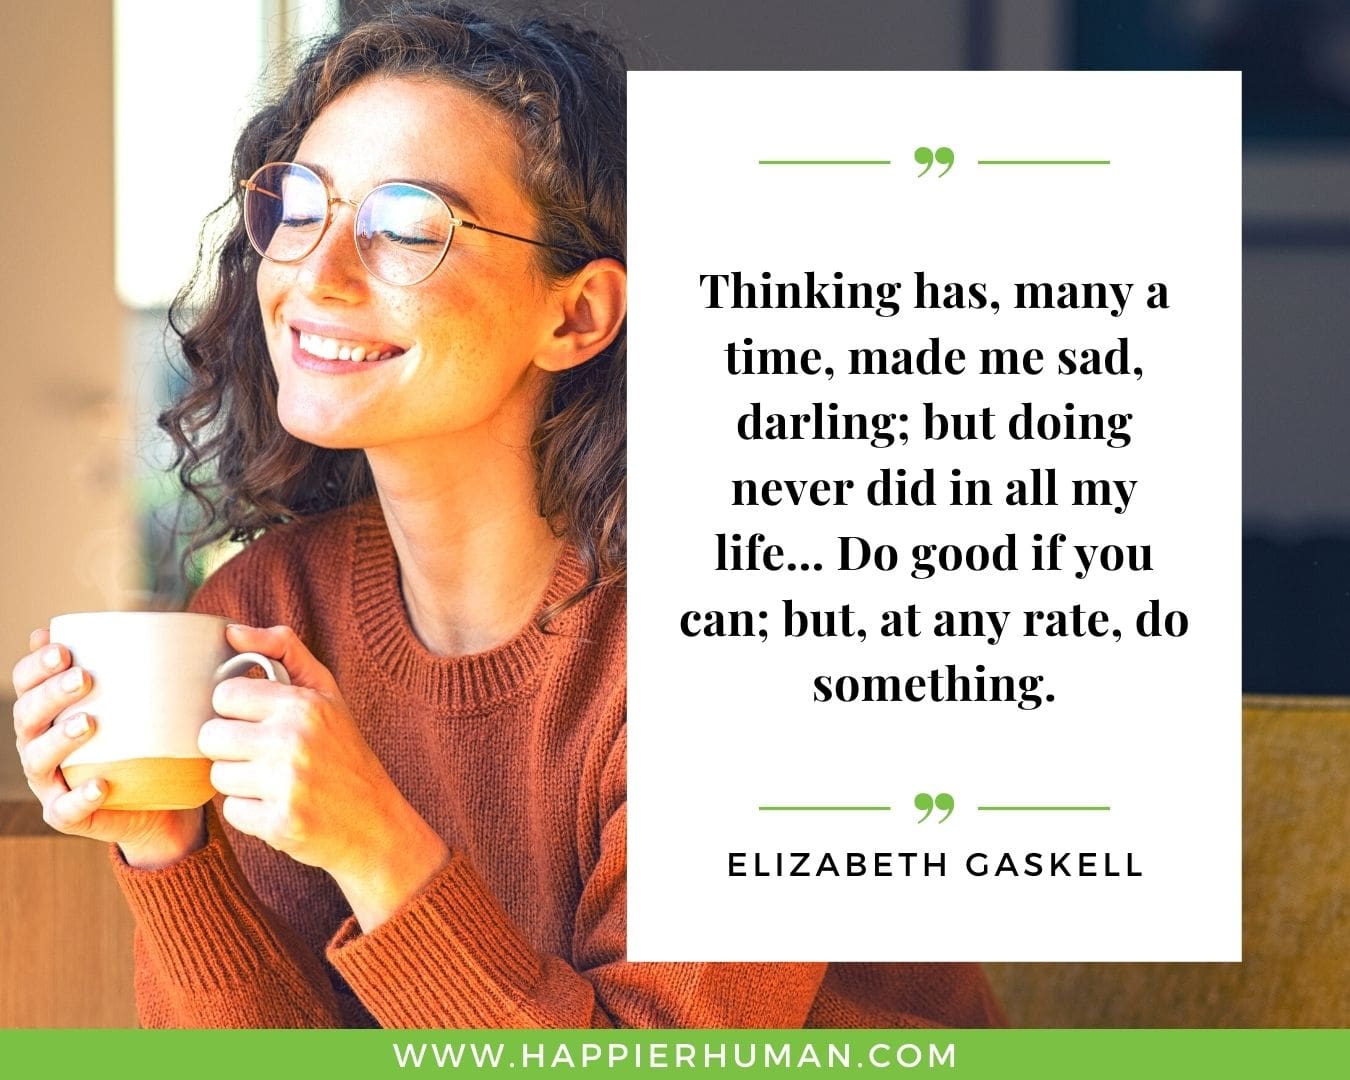 Overthinking Quotes - “Thinking has, many a time, made me sad, darling; but doing never did in all my life… Do good if you can; but, at any rate, do something.” - Elizabeth Gaskell